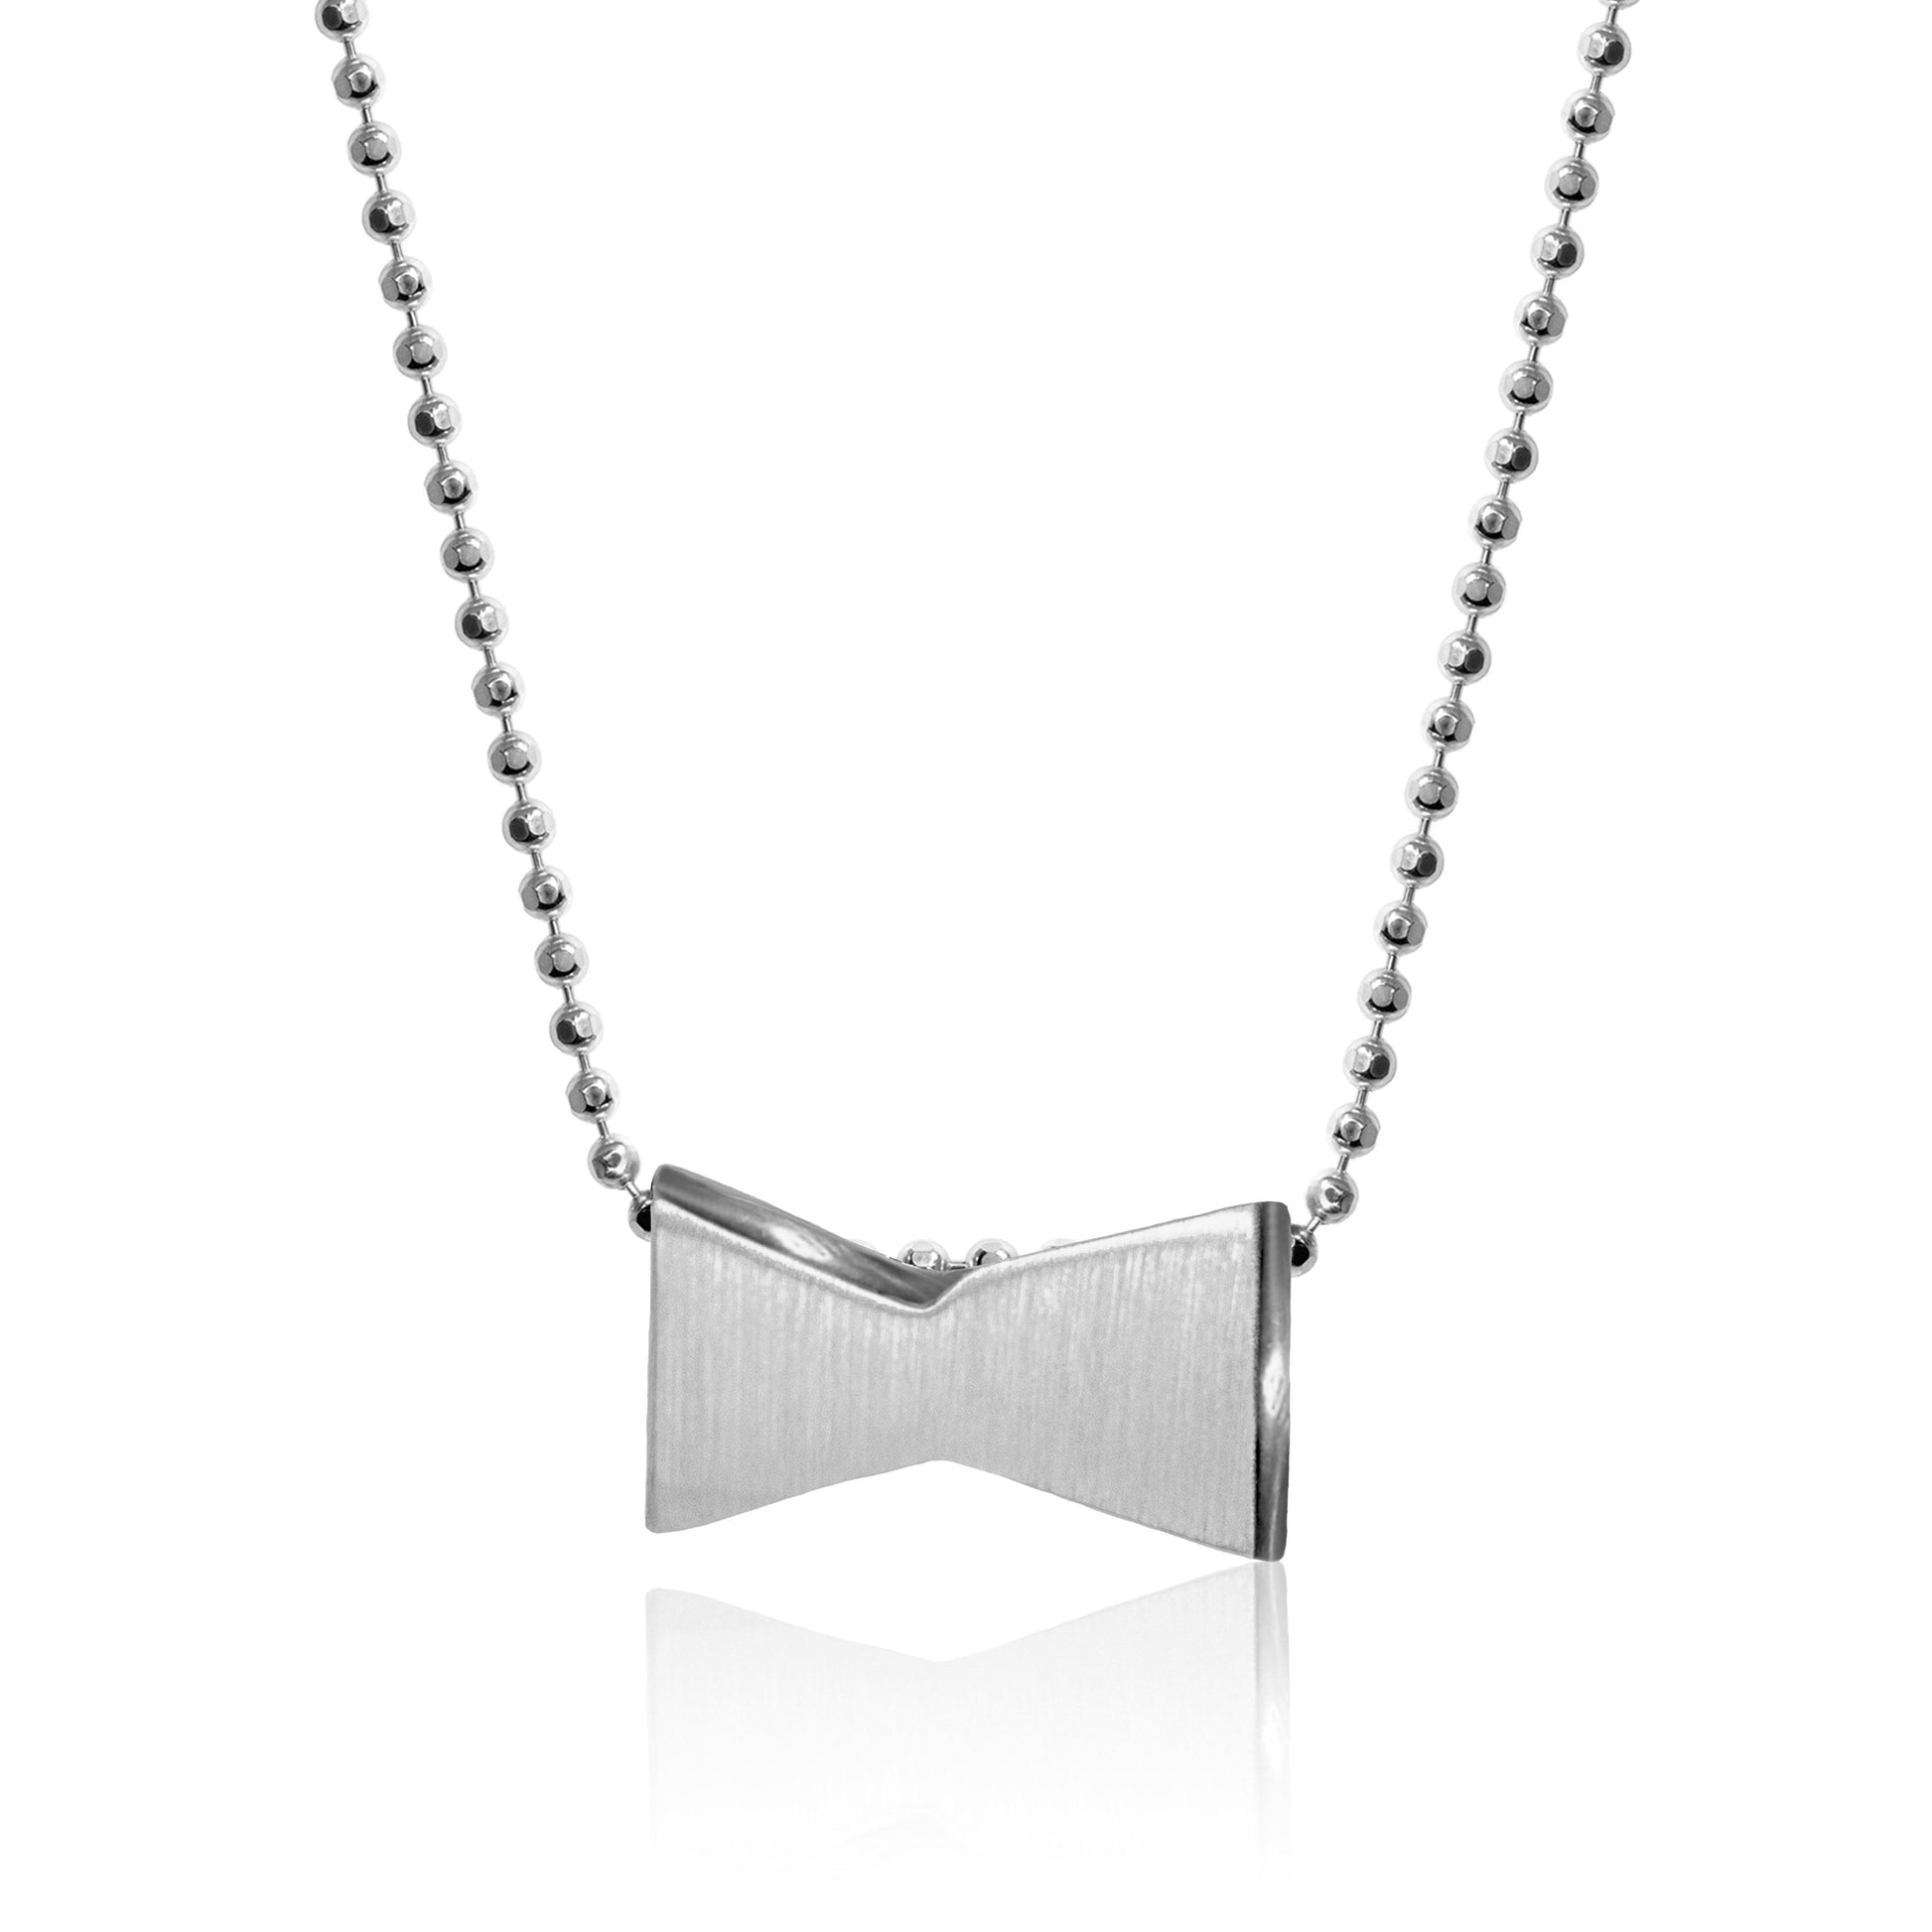 From Jewelry designer Alex Woo a 14 carat silver budweiser bowtie necklace, 16 inches long